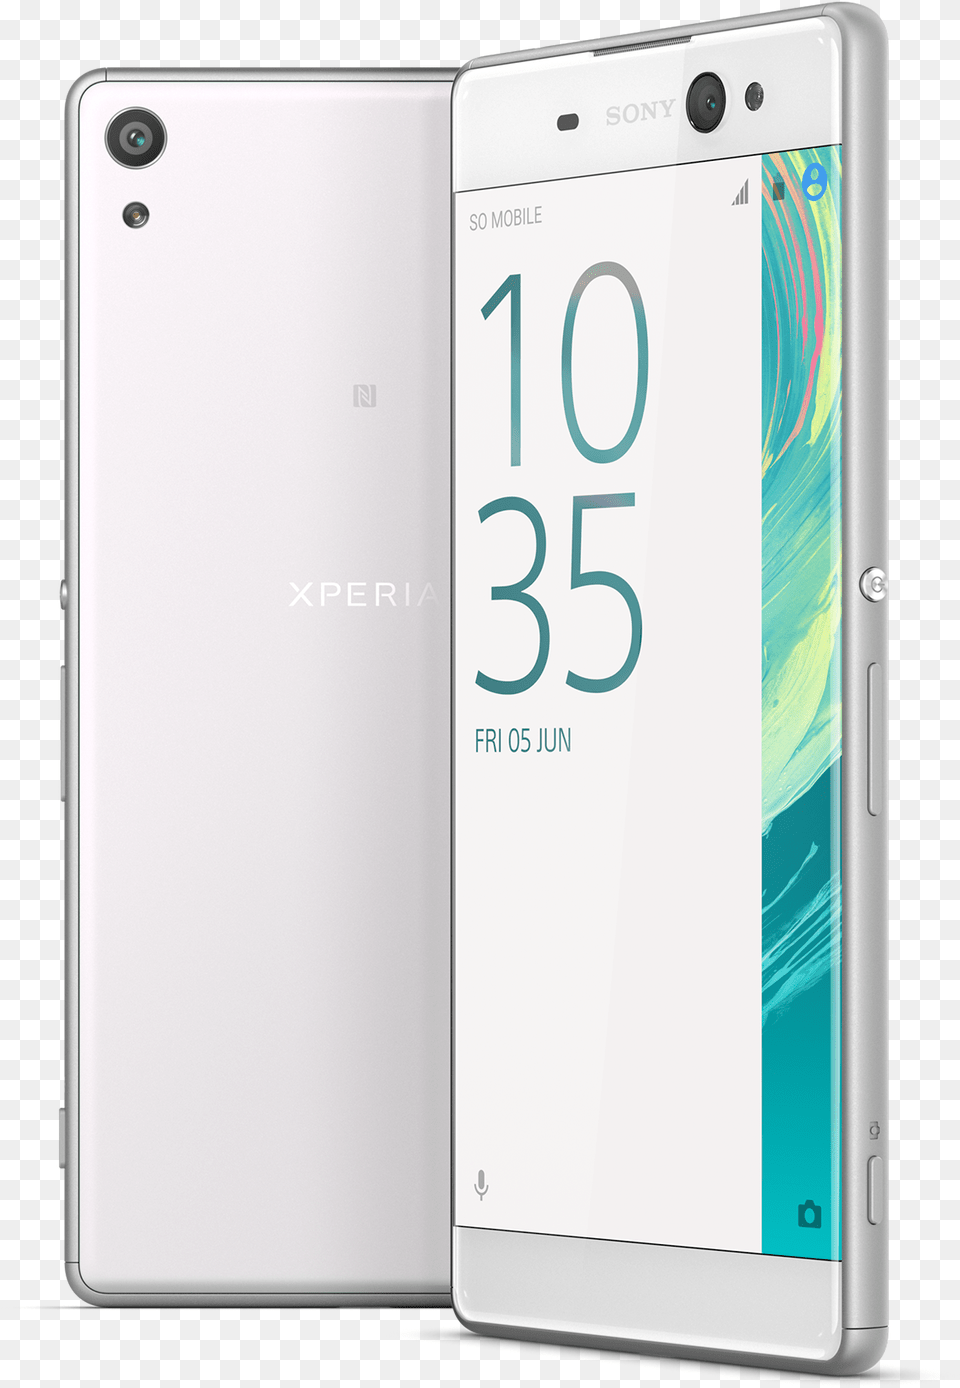 Sony Xperia Xa Ultra F3216 Sony Xperia Xa Ultra, Electronics, Mobile Phone, Phone, Iphone Free Png